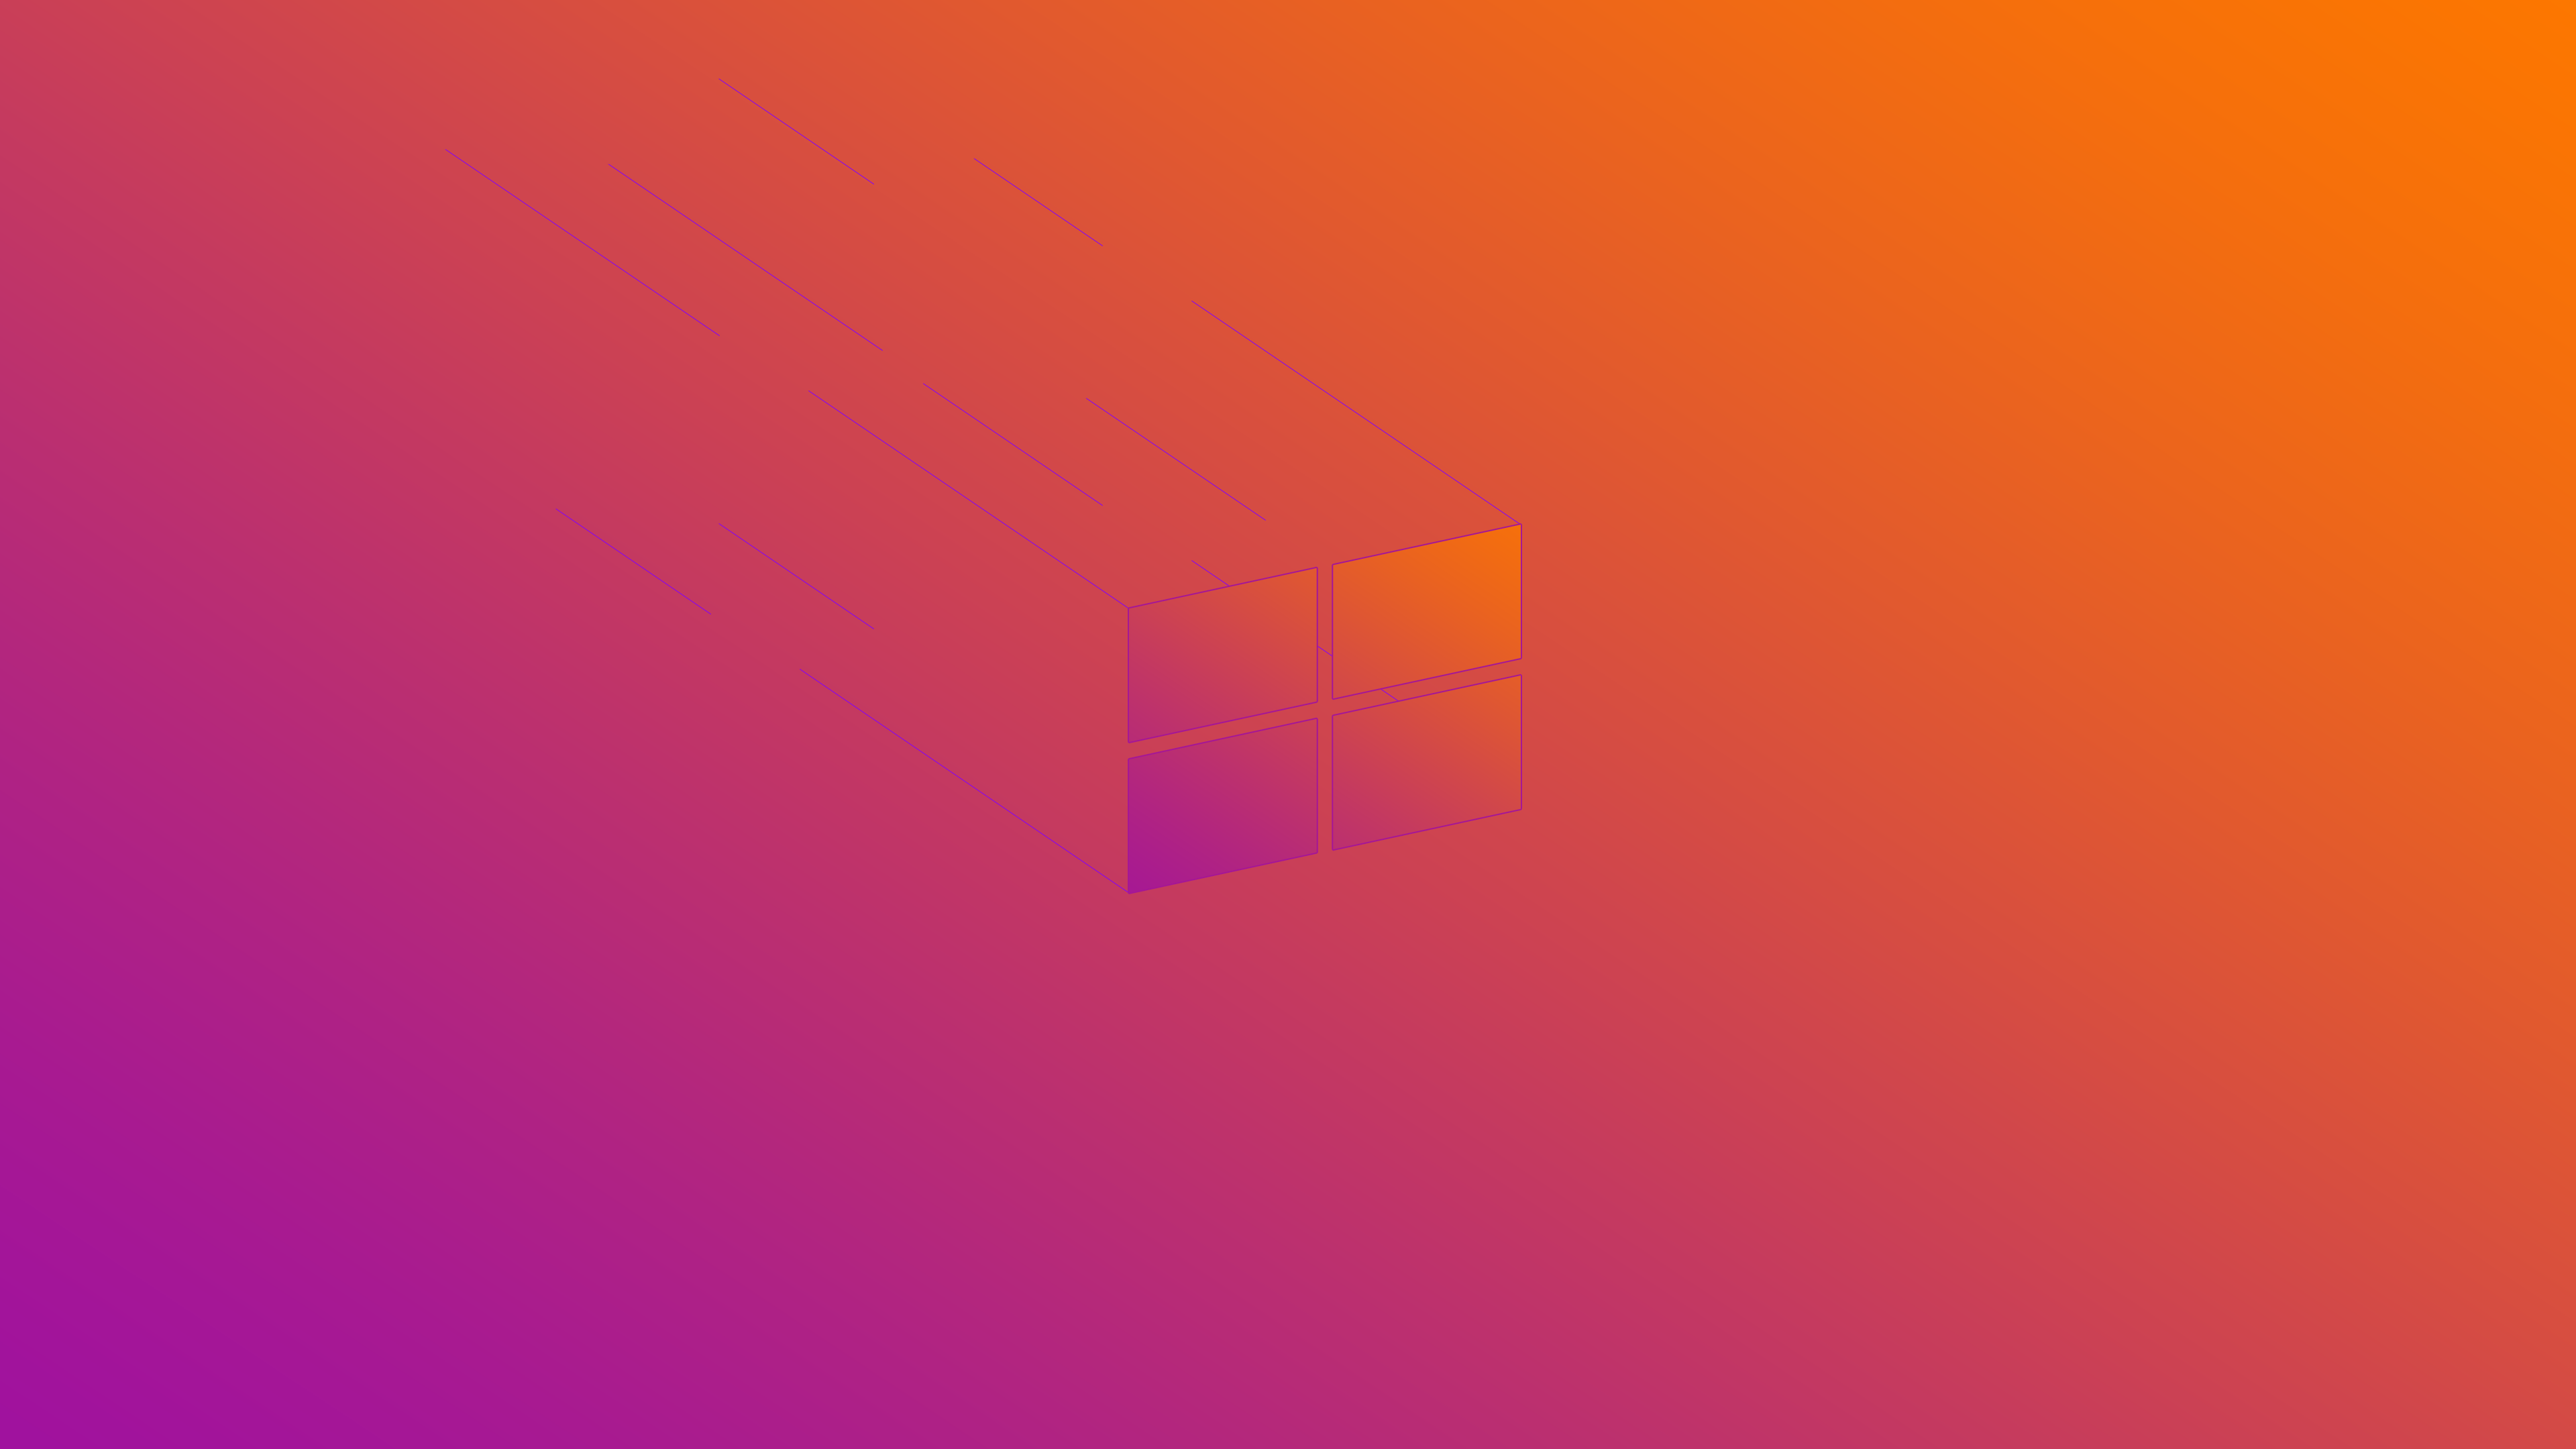 General 3840x2160 Windows 10 windows logo abstract colorful